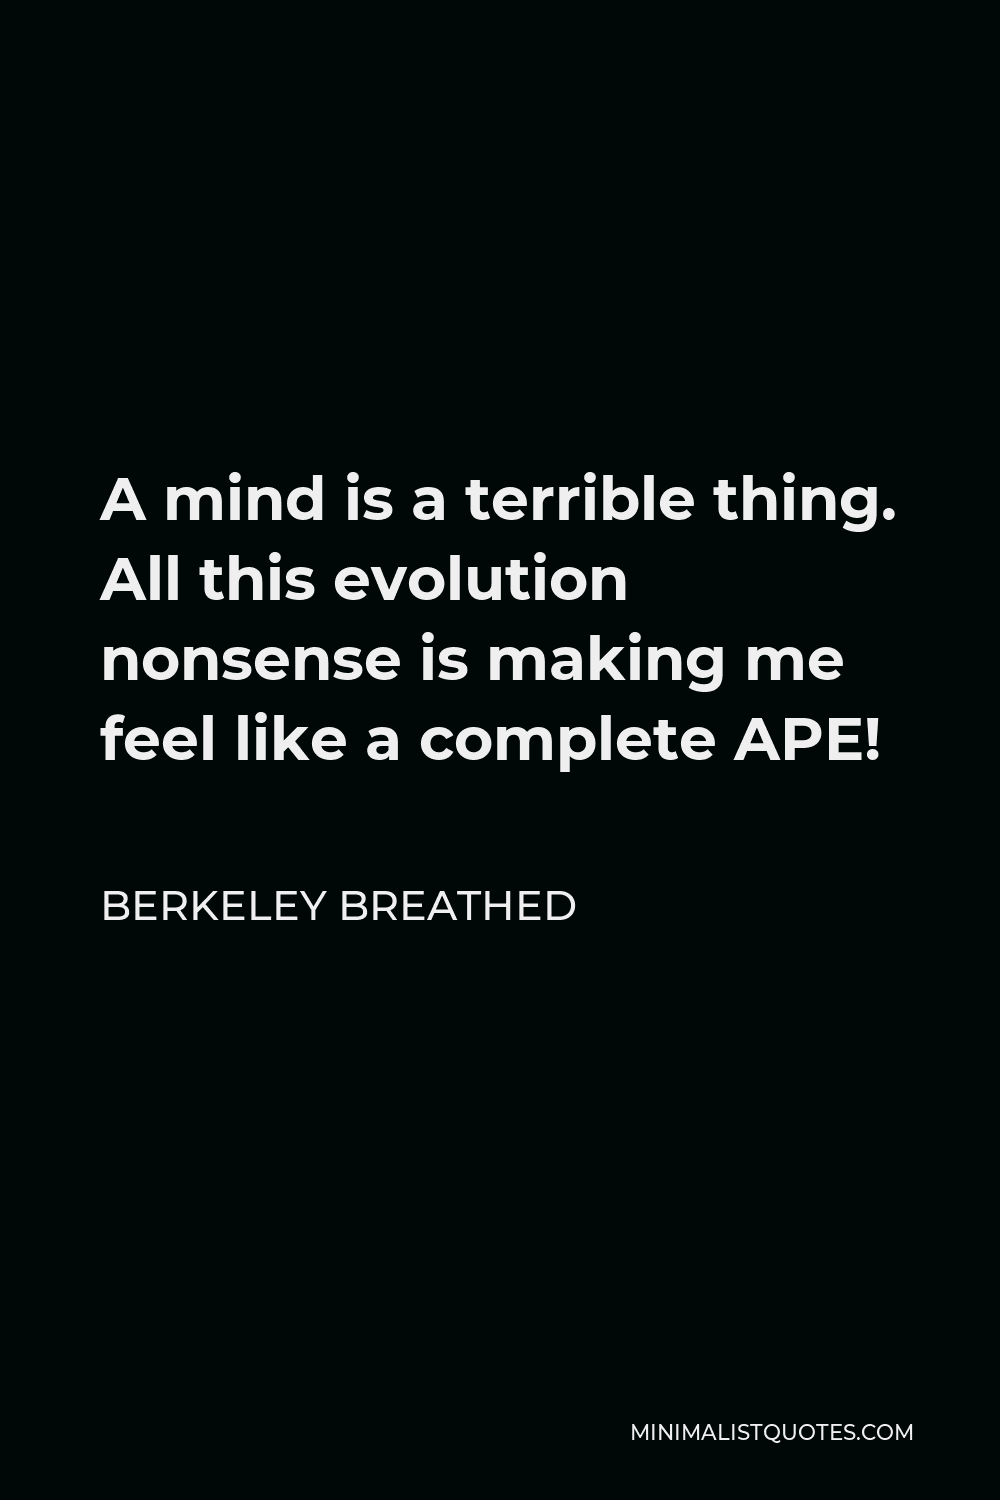 Berkeley Breathed Quote - A mind is a terrible thing. All this evolution nonsense is making me feel like a complete APE!